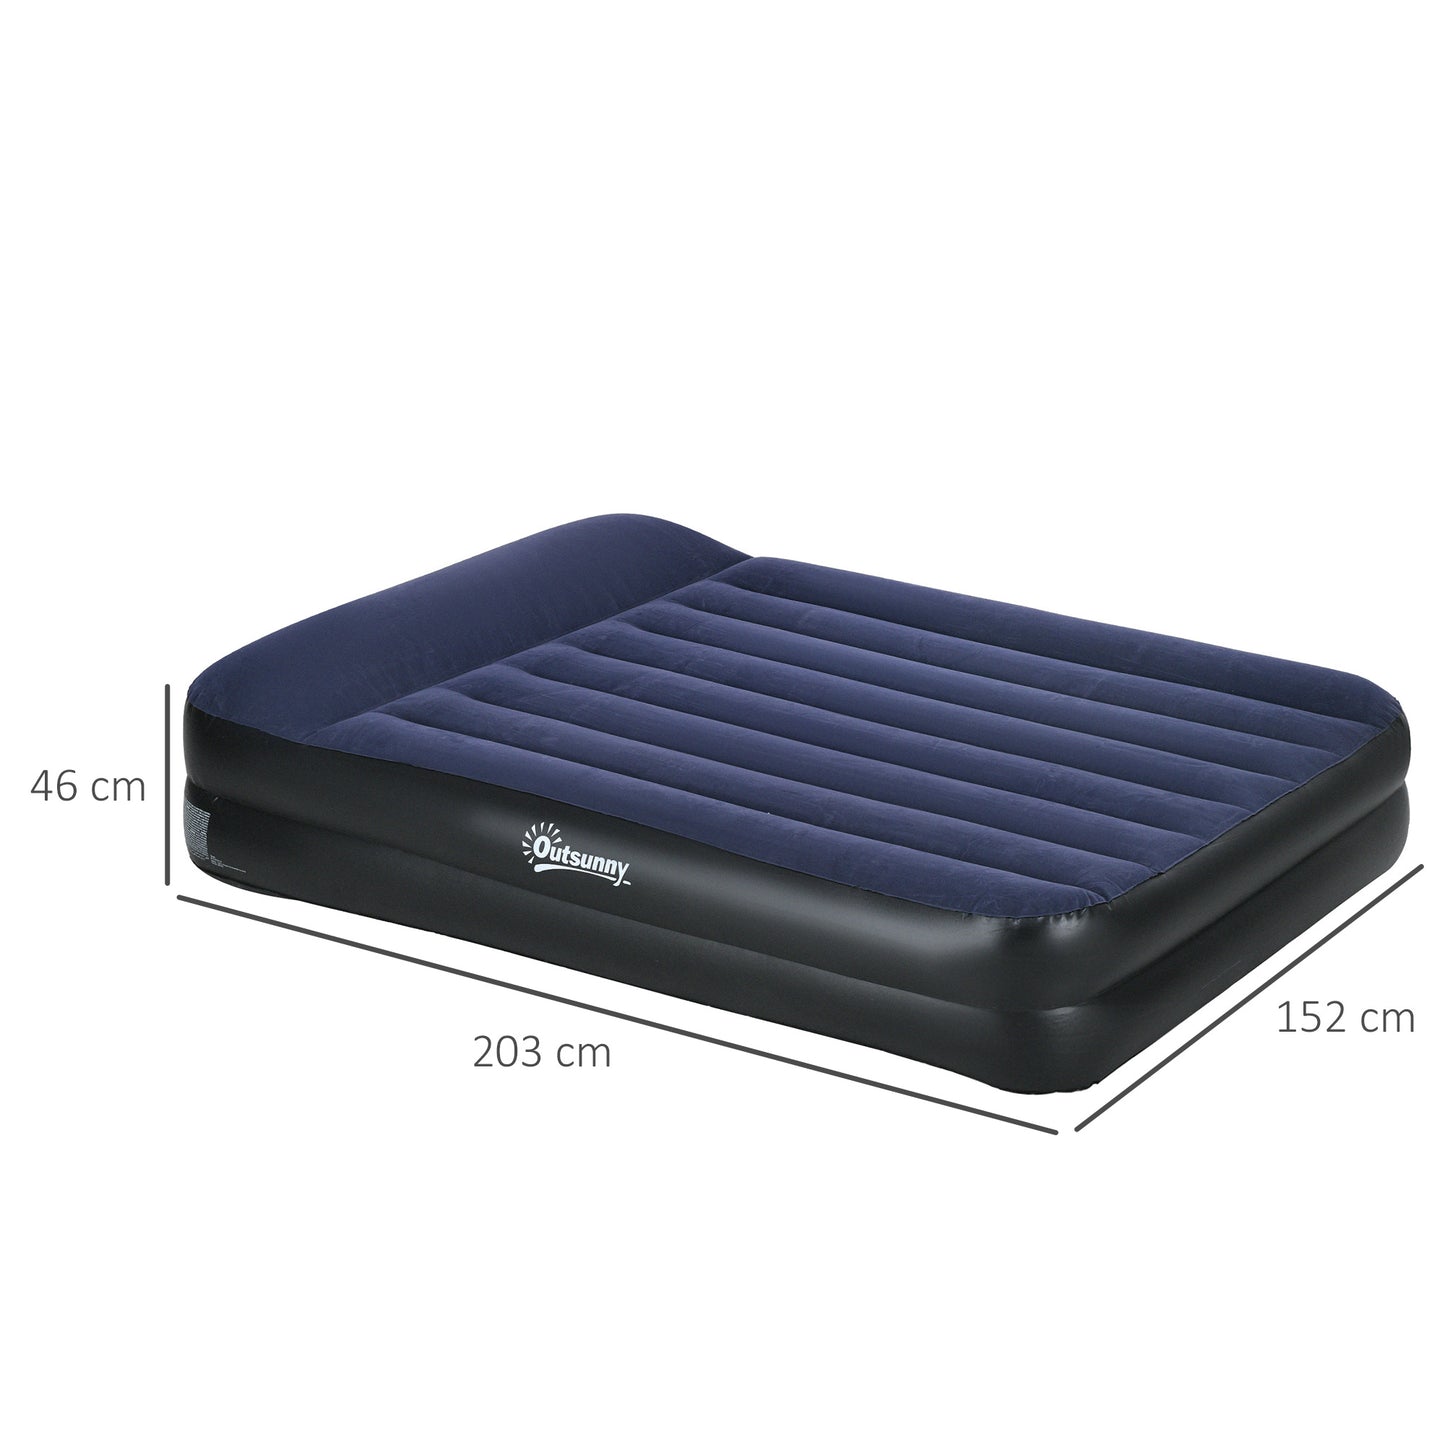 Outsunny Queen Air Bed with Built-in Electric Pump and Integrated Pillow